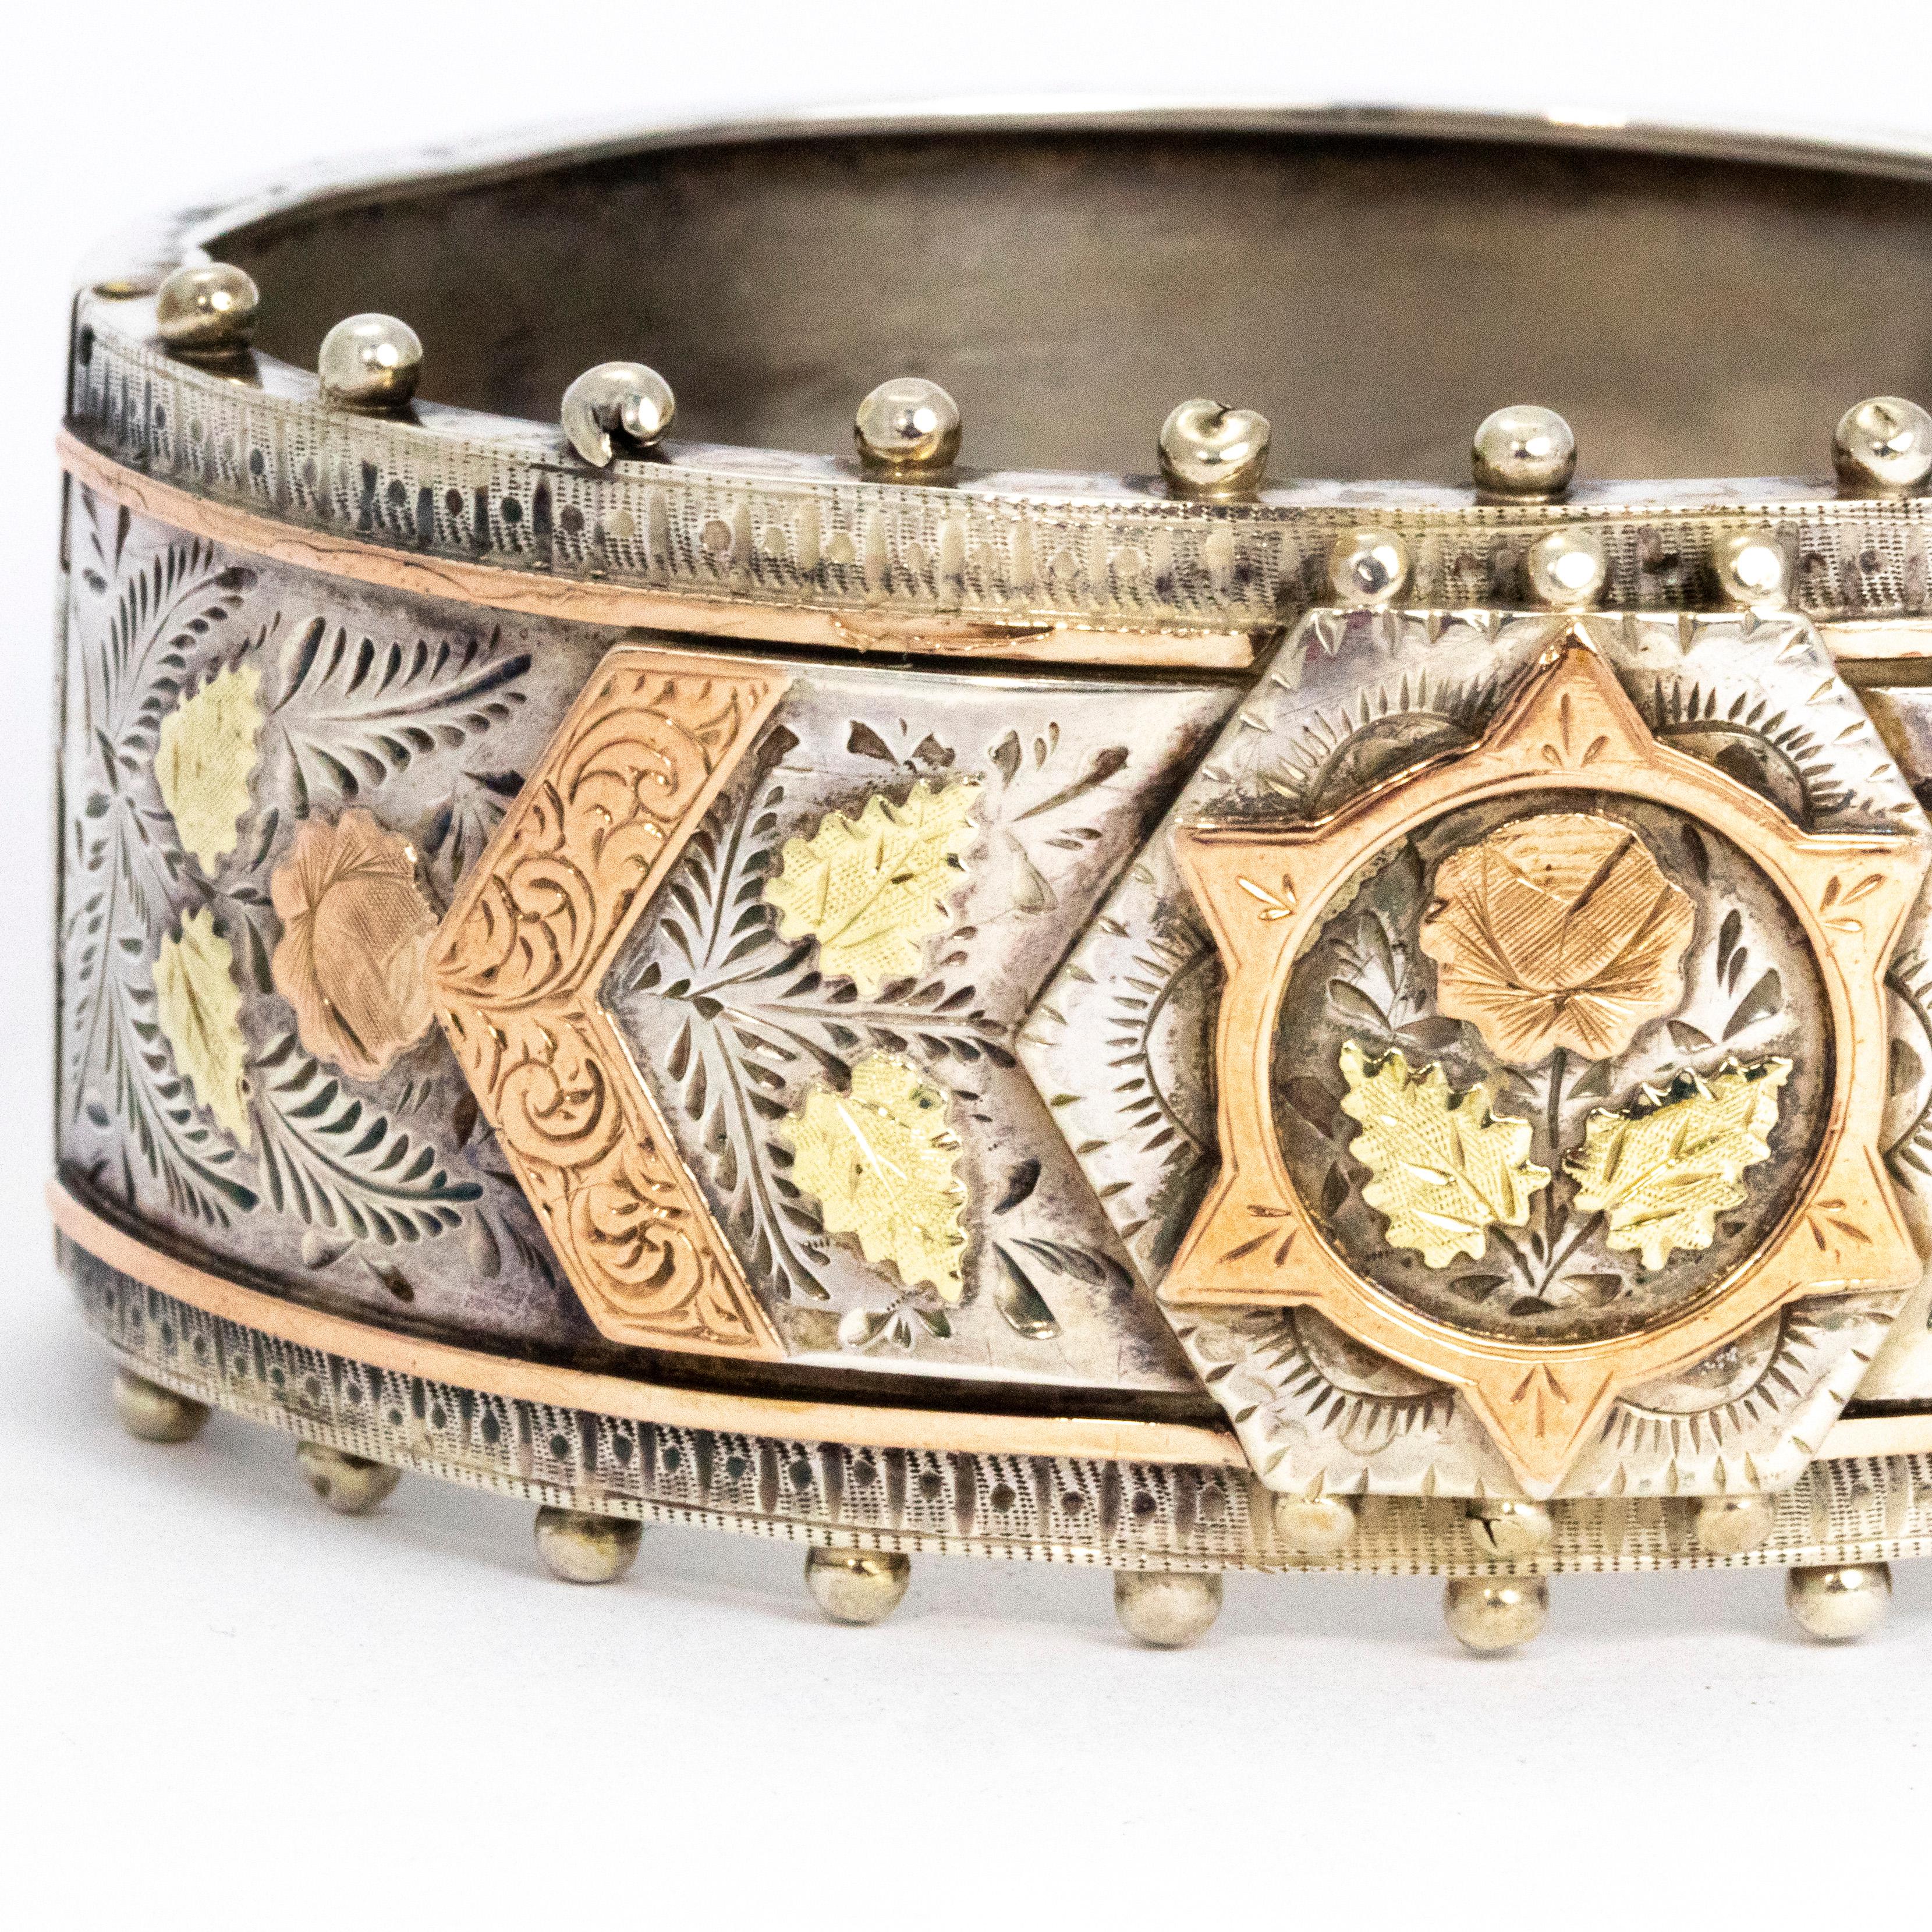 This stunning bangle features silver, yellow gold and rose gold details. The main band is modelled in silver and also has silver plaque overlays. The main plaque has a gorgeous flower priced together with yellow gold and rose gold and wither side of